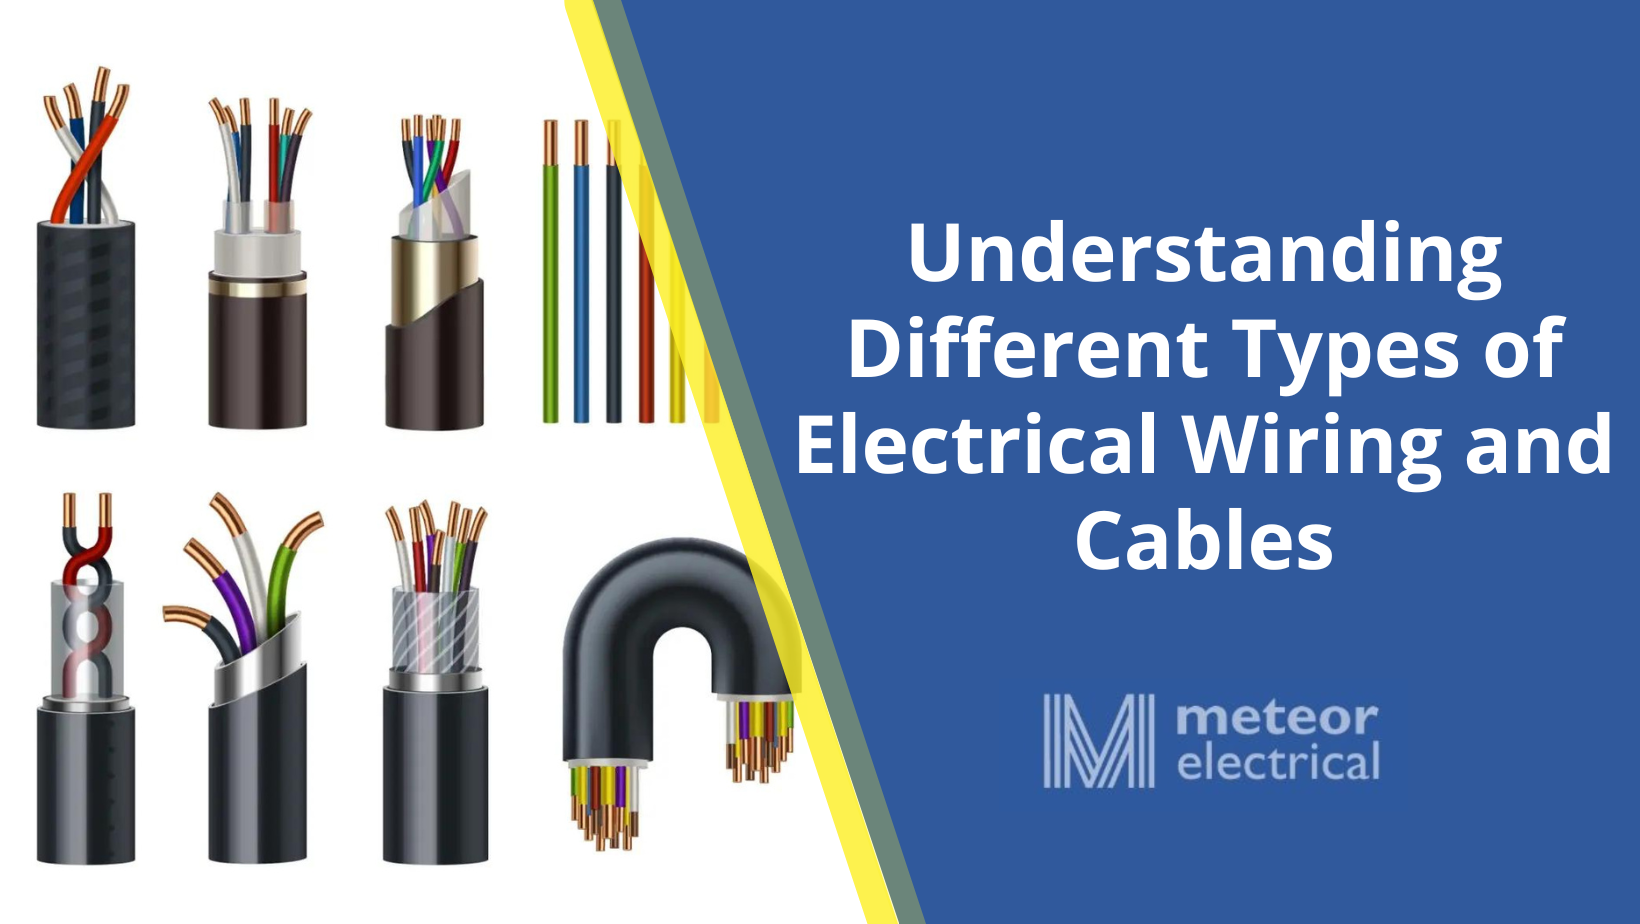 Understanding Different Types of Electrical Wiring and Cables